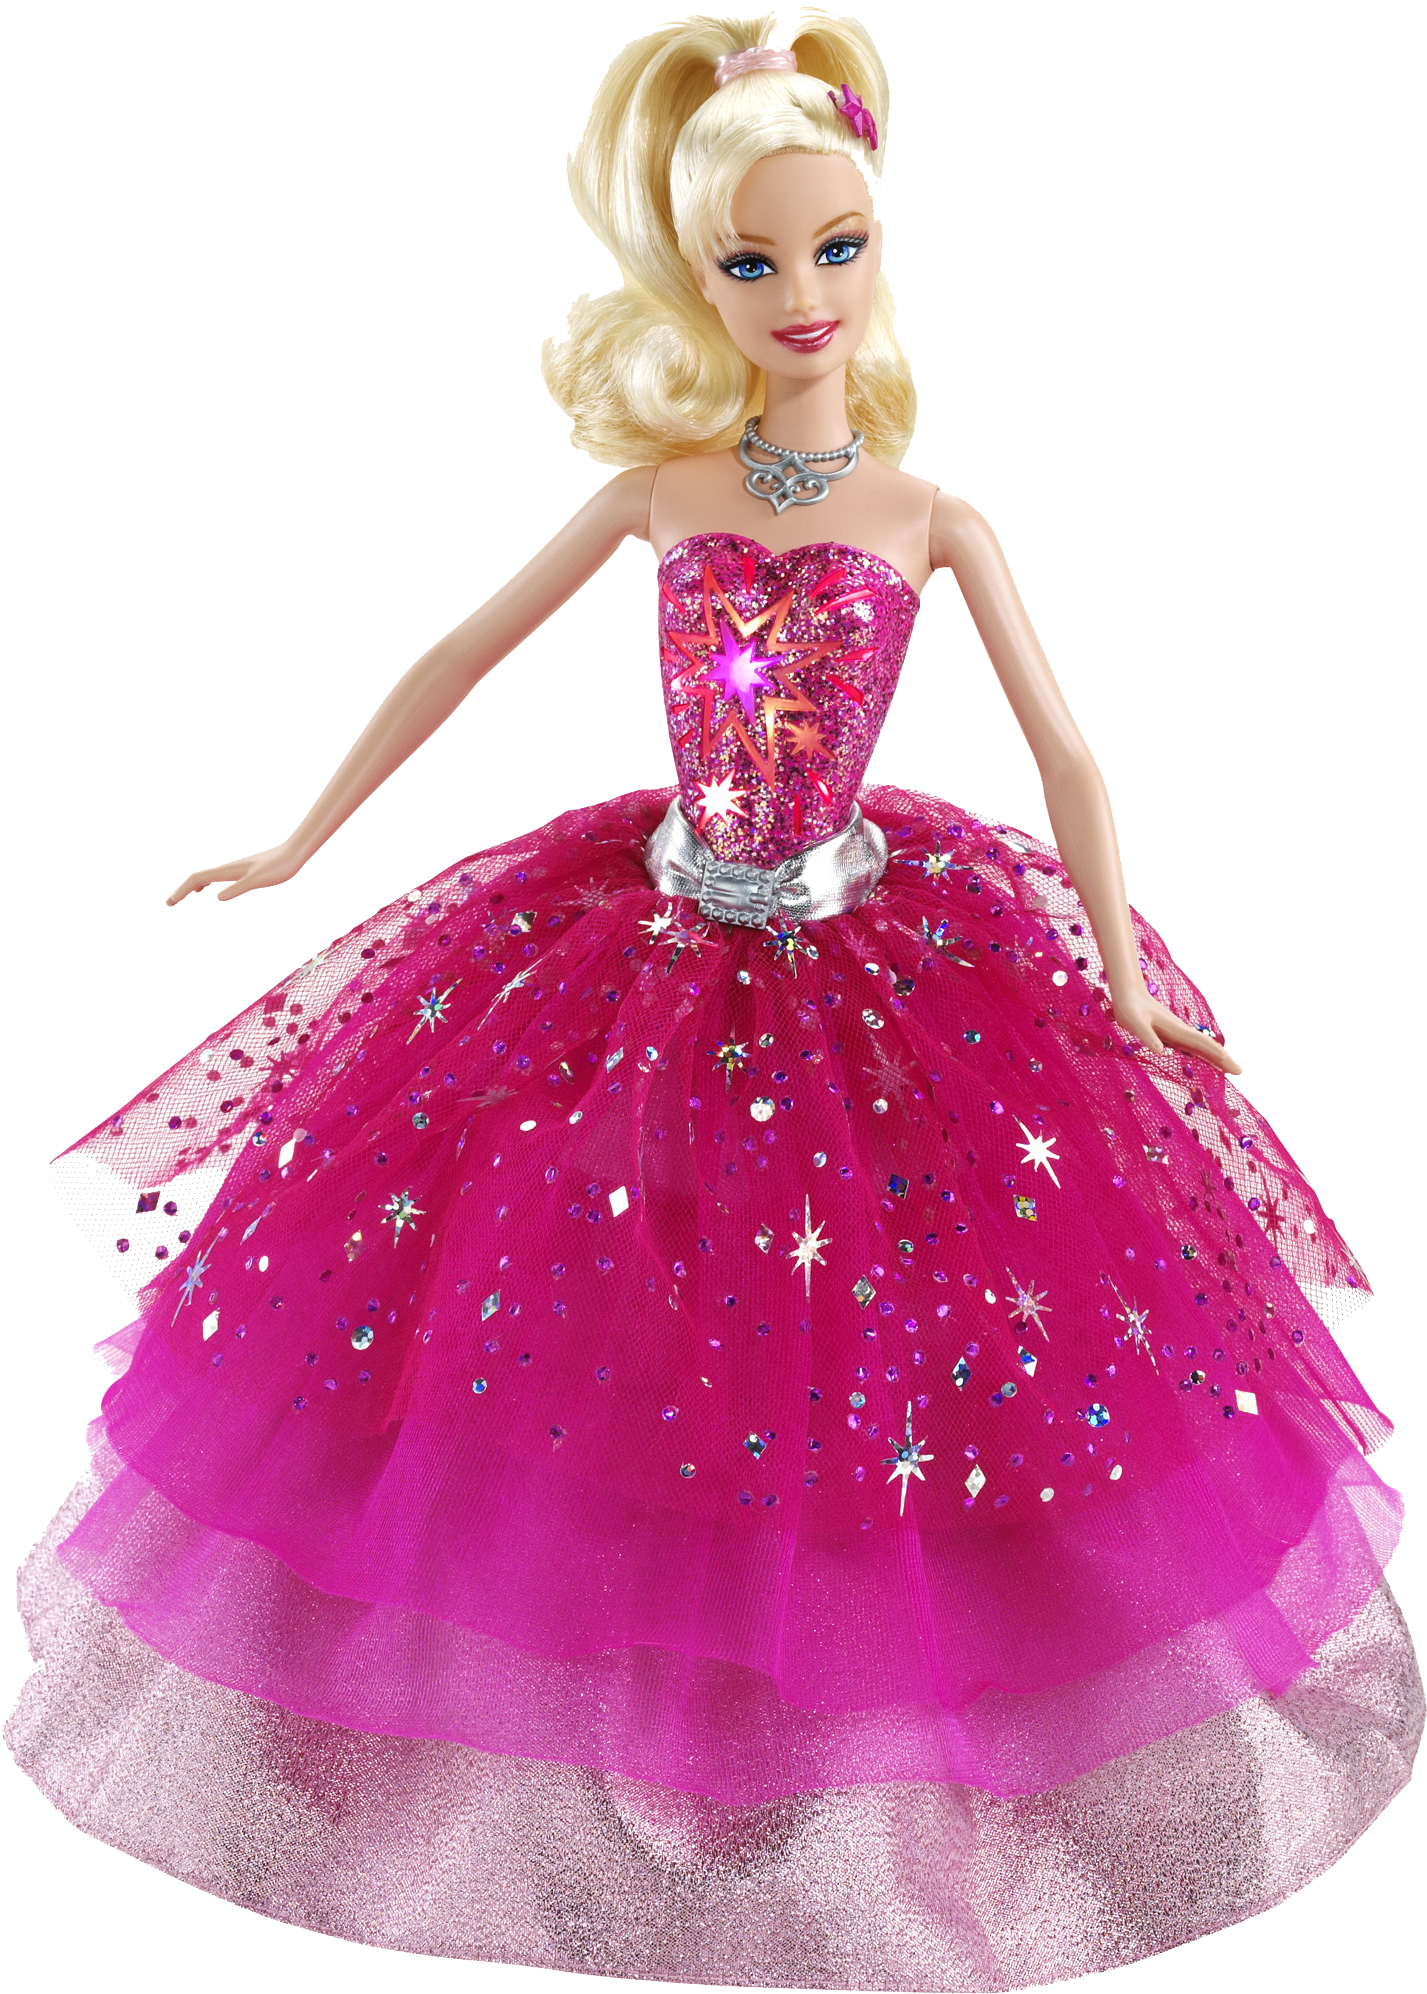 Barbie Doll Free Png Image Barbie Doll Png